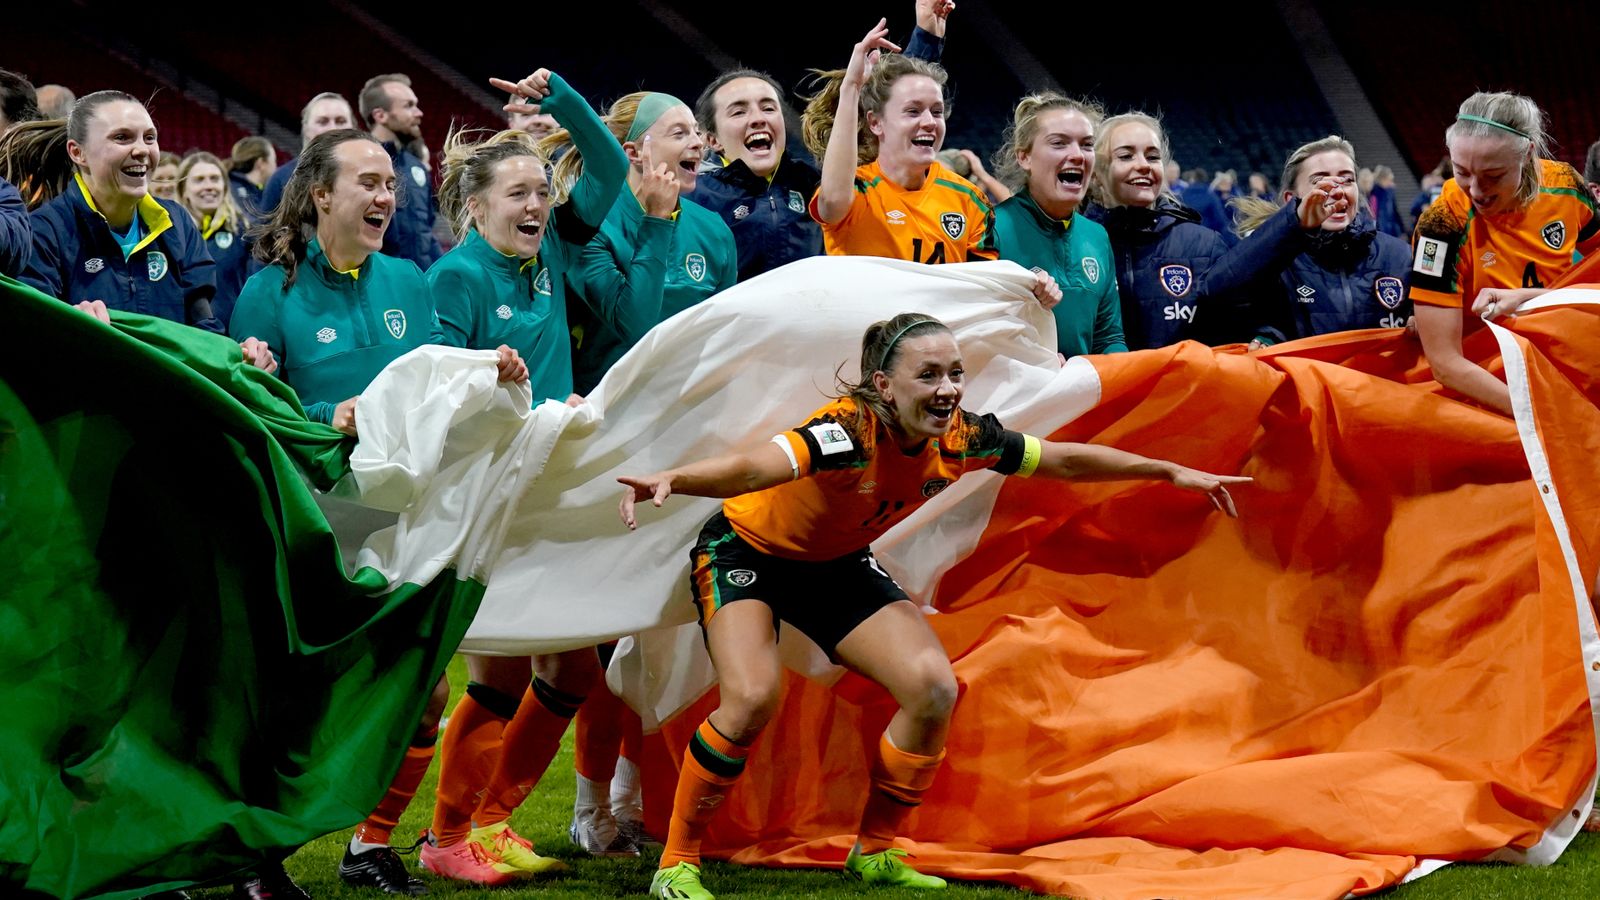 republic-of-ireland-qualifying-for-the-world-cup-is-incredible-for-women-s-sport-in-ireland-says-grace-walsh